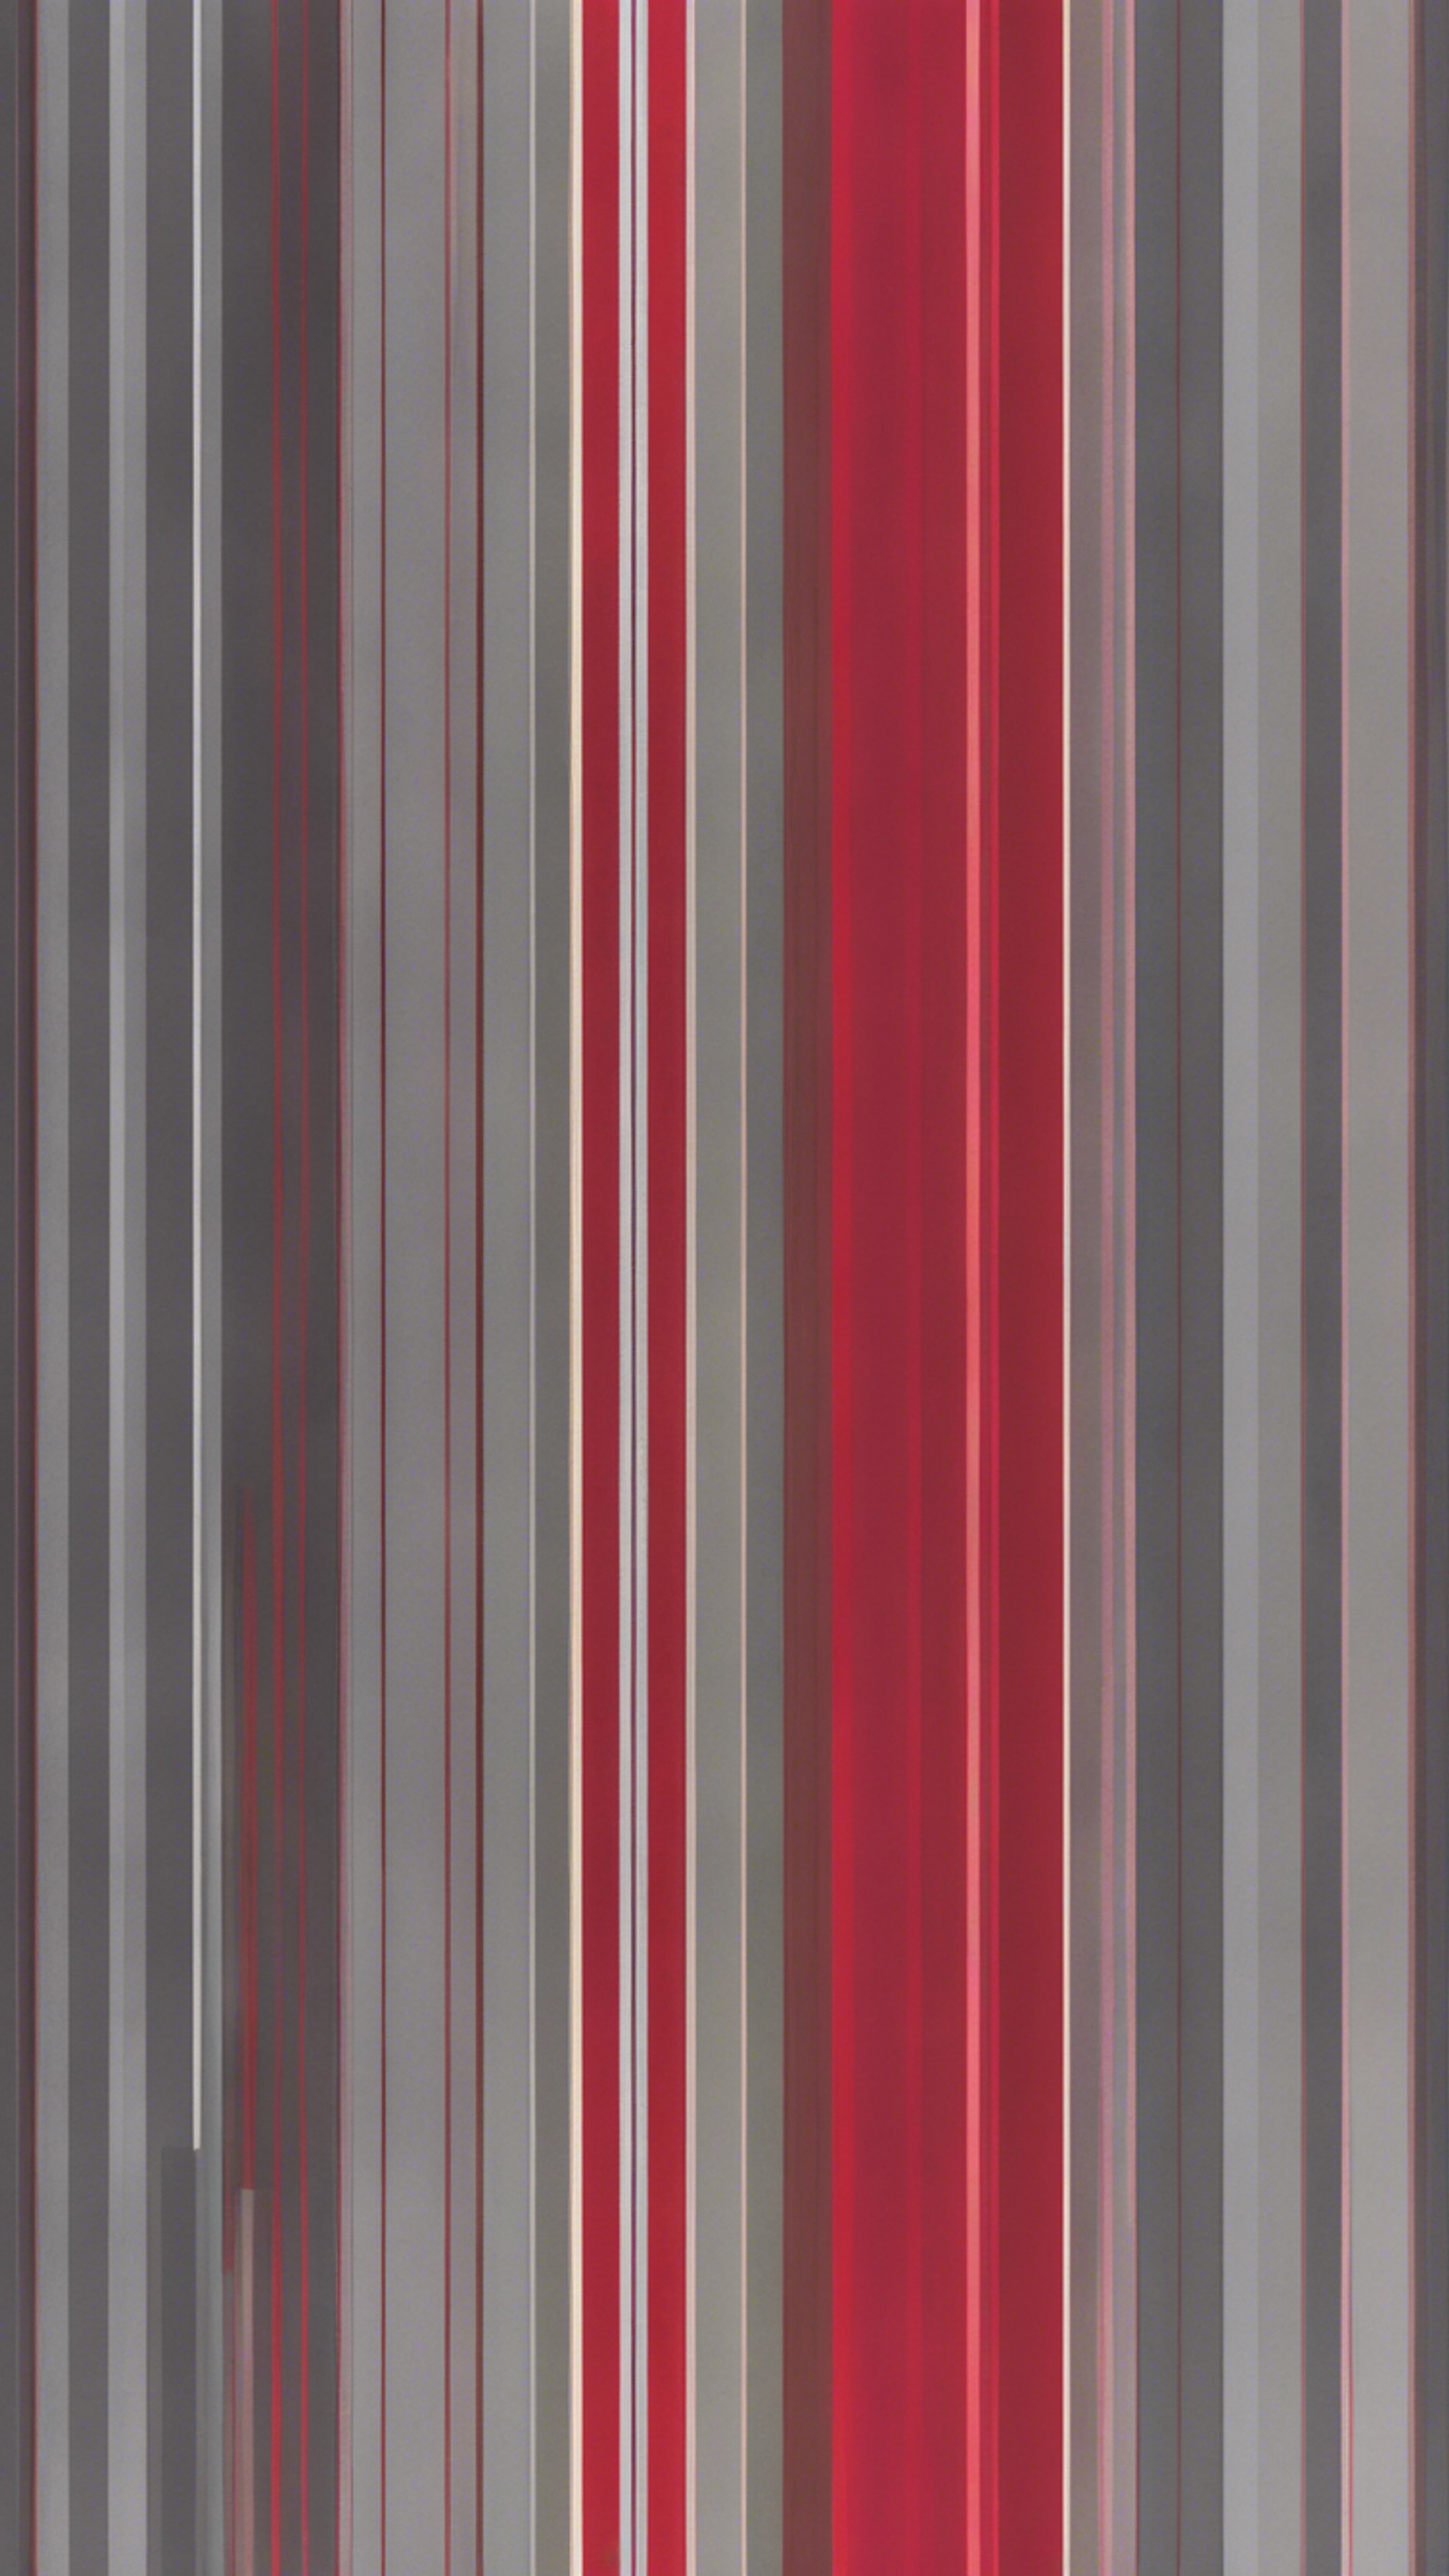 Pattern inspired by modern art, showcasing alternating bands of red and grey in a gradient arrangement. Tapet[fecd92d91f0c4817b510]